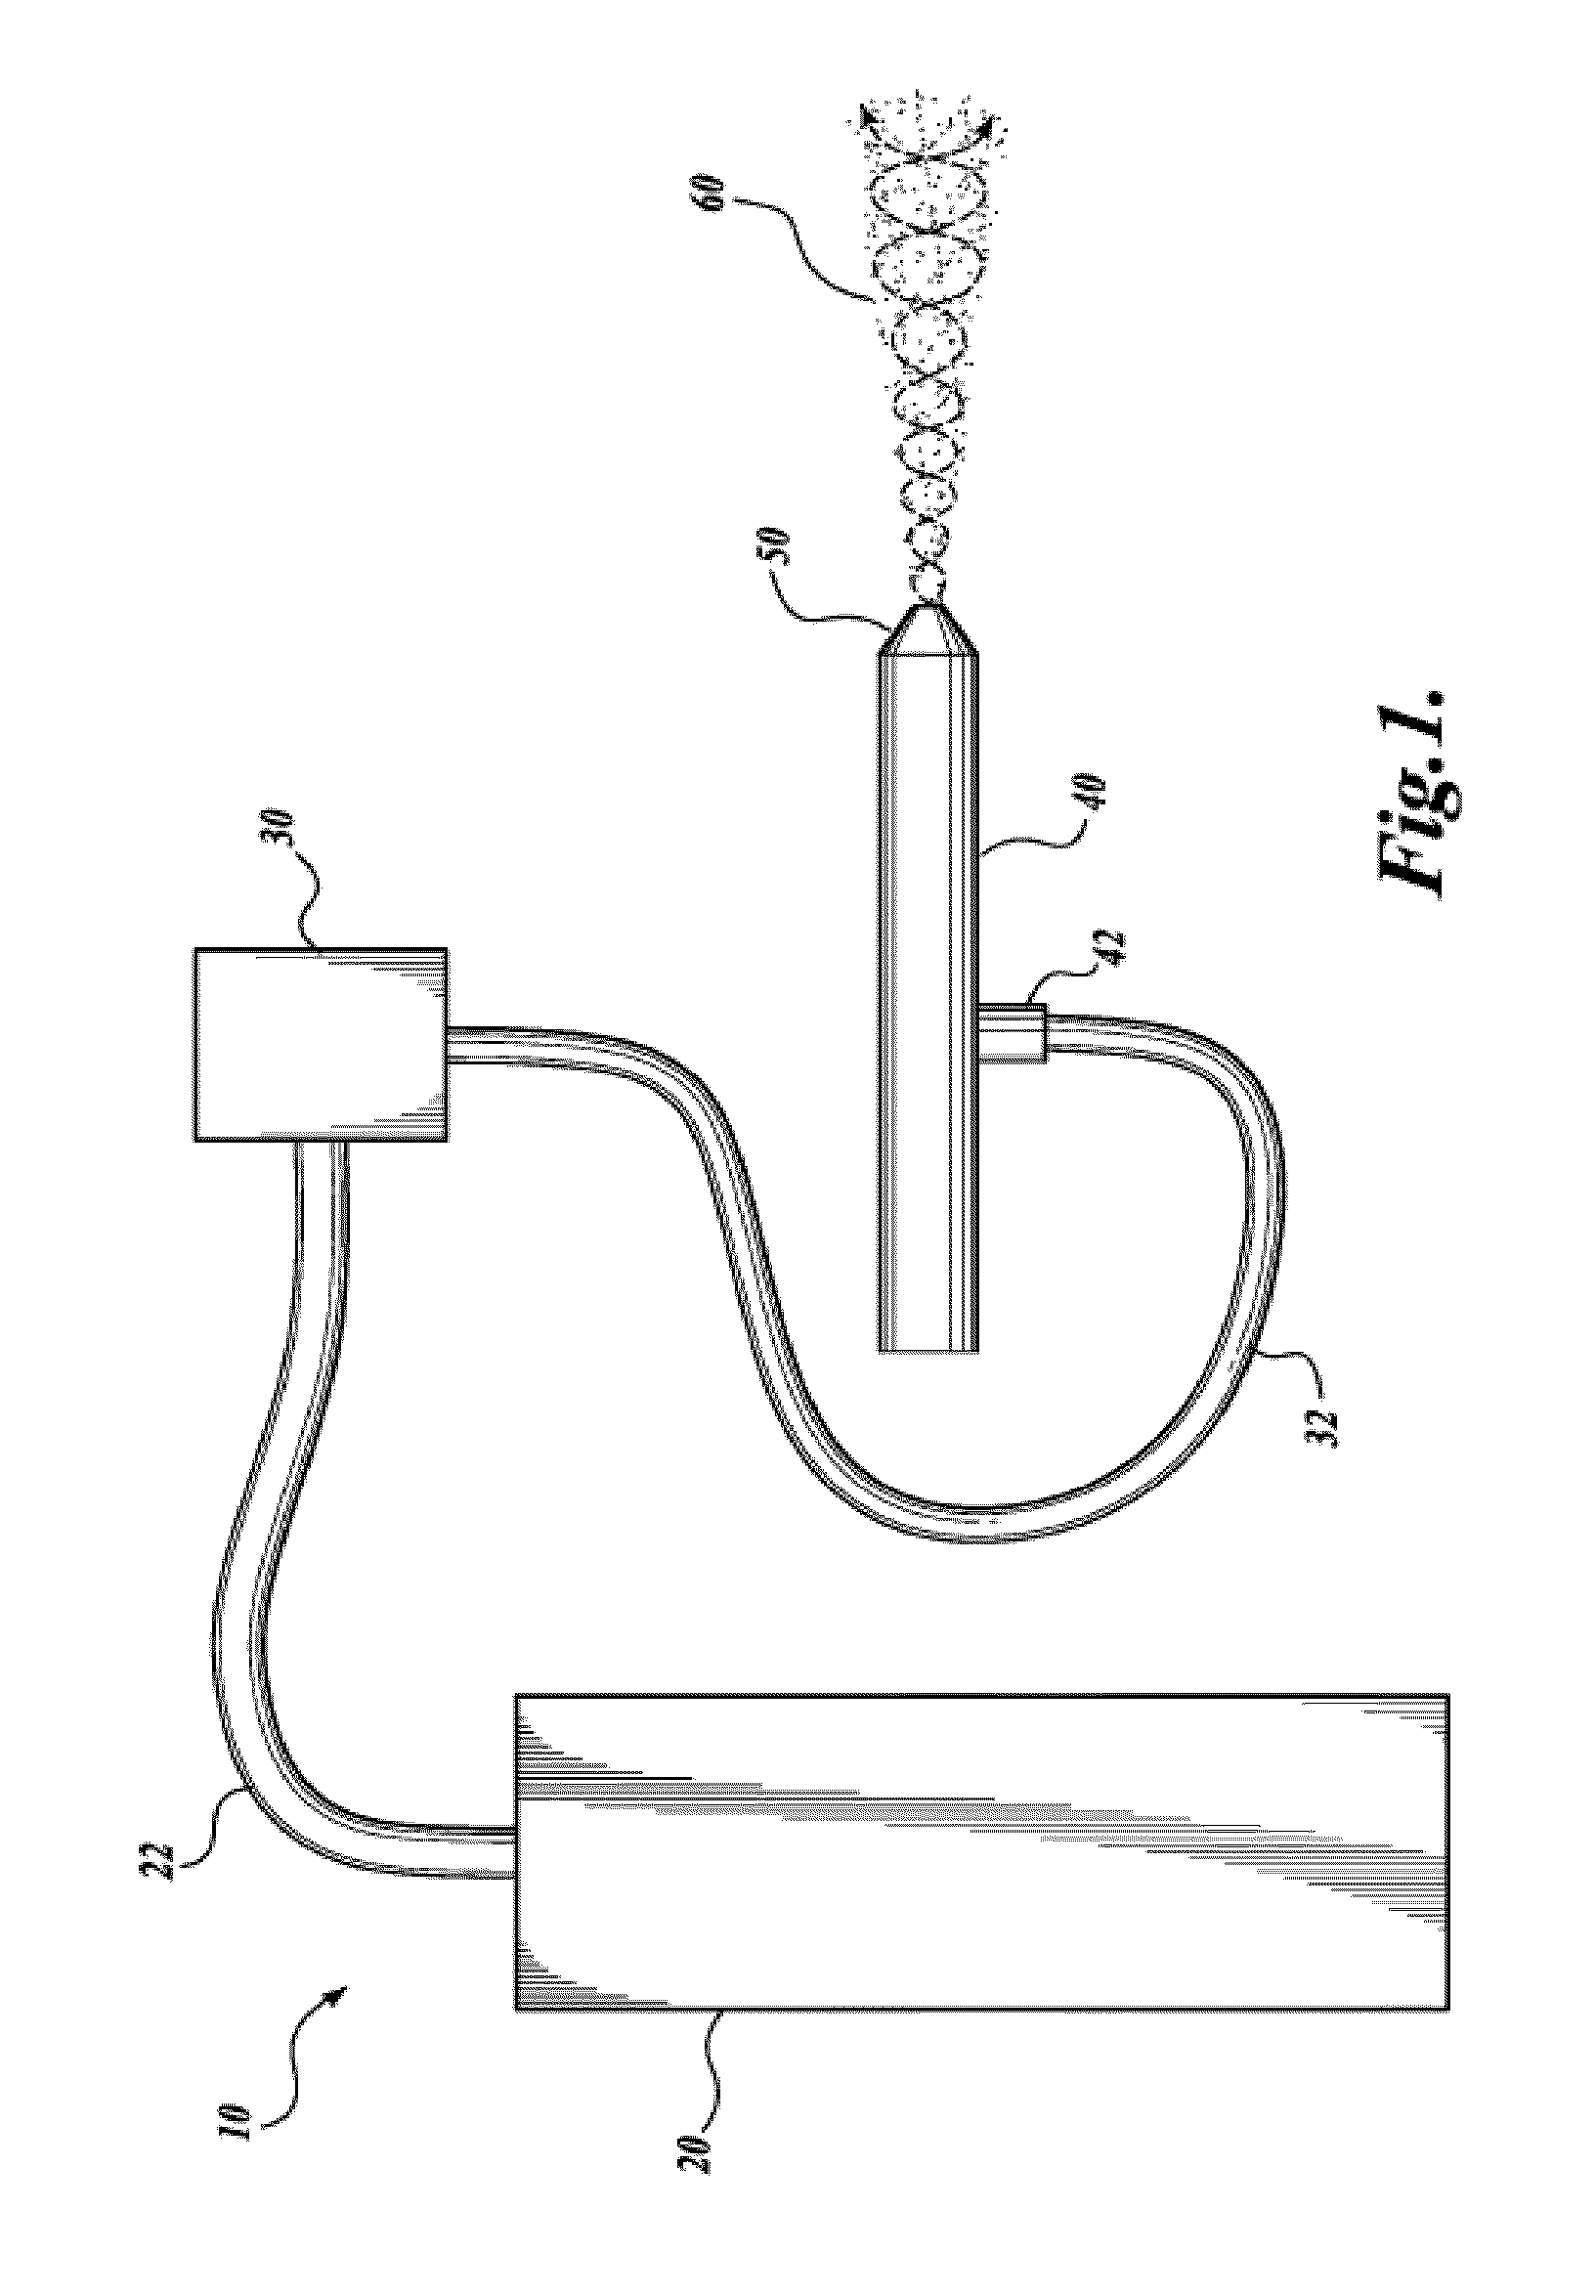 Circumferential Aerosol Device for Delivering Drugs to Olfactory Epithelium and Brain